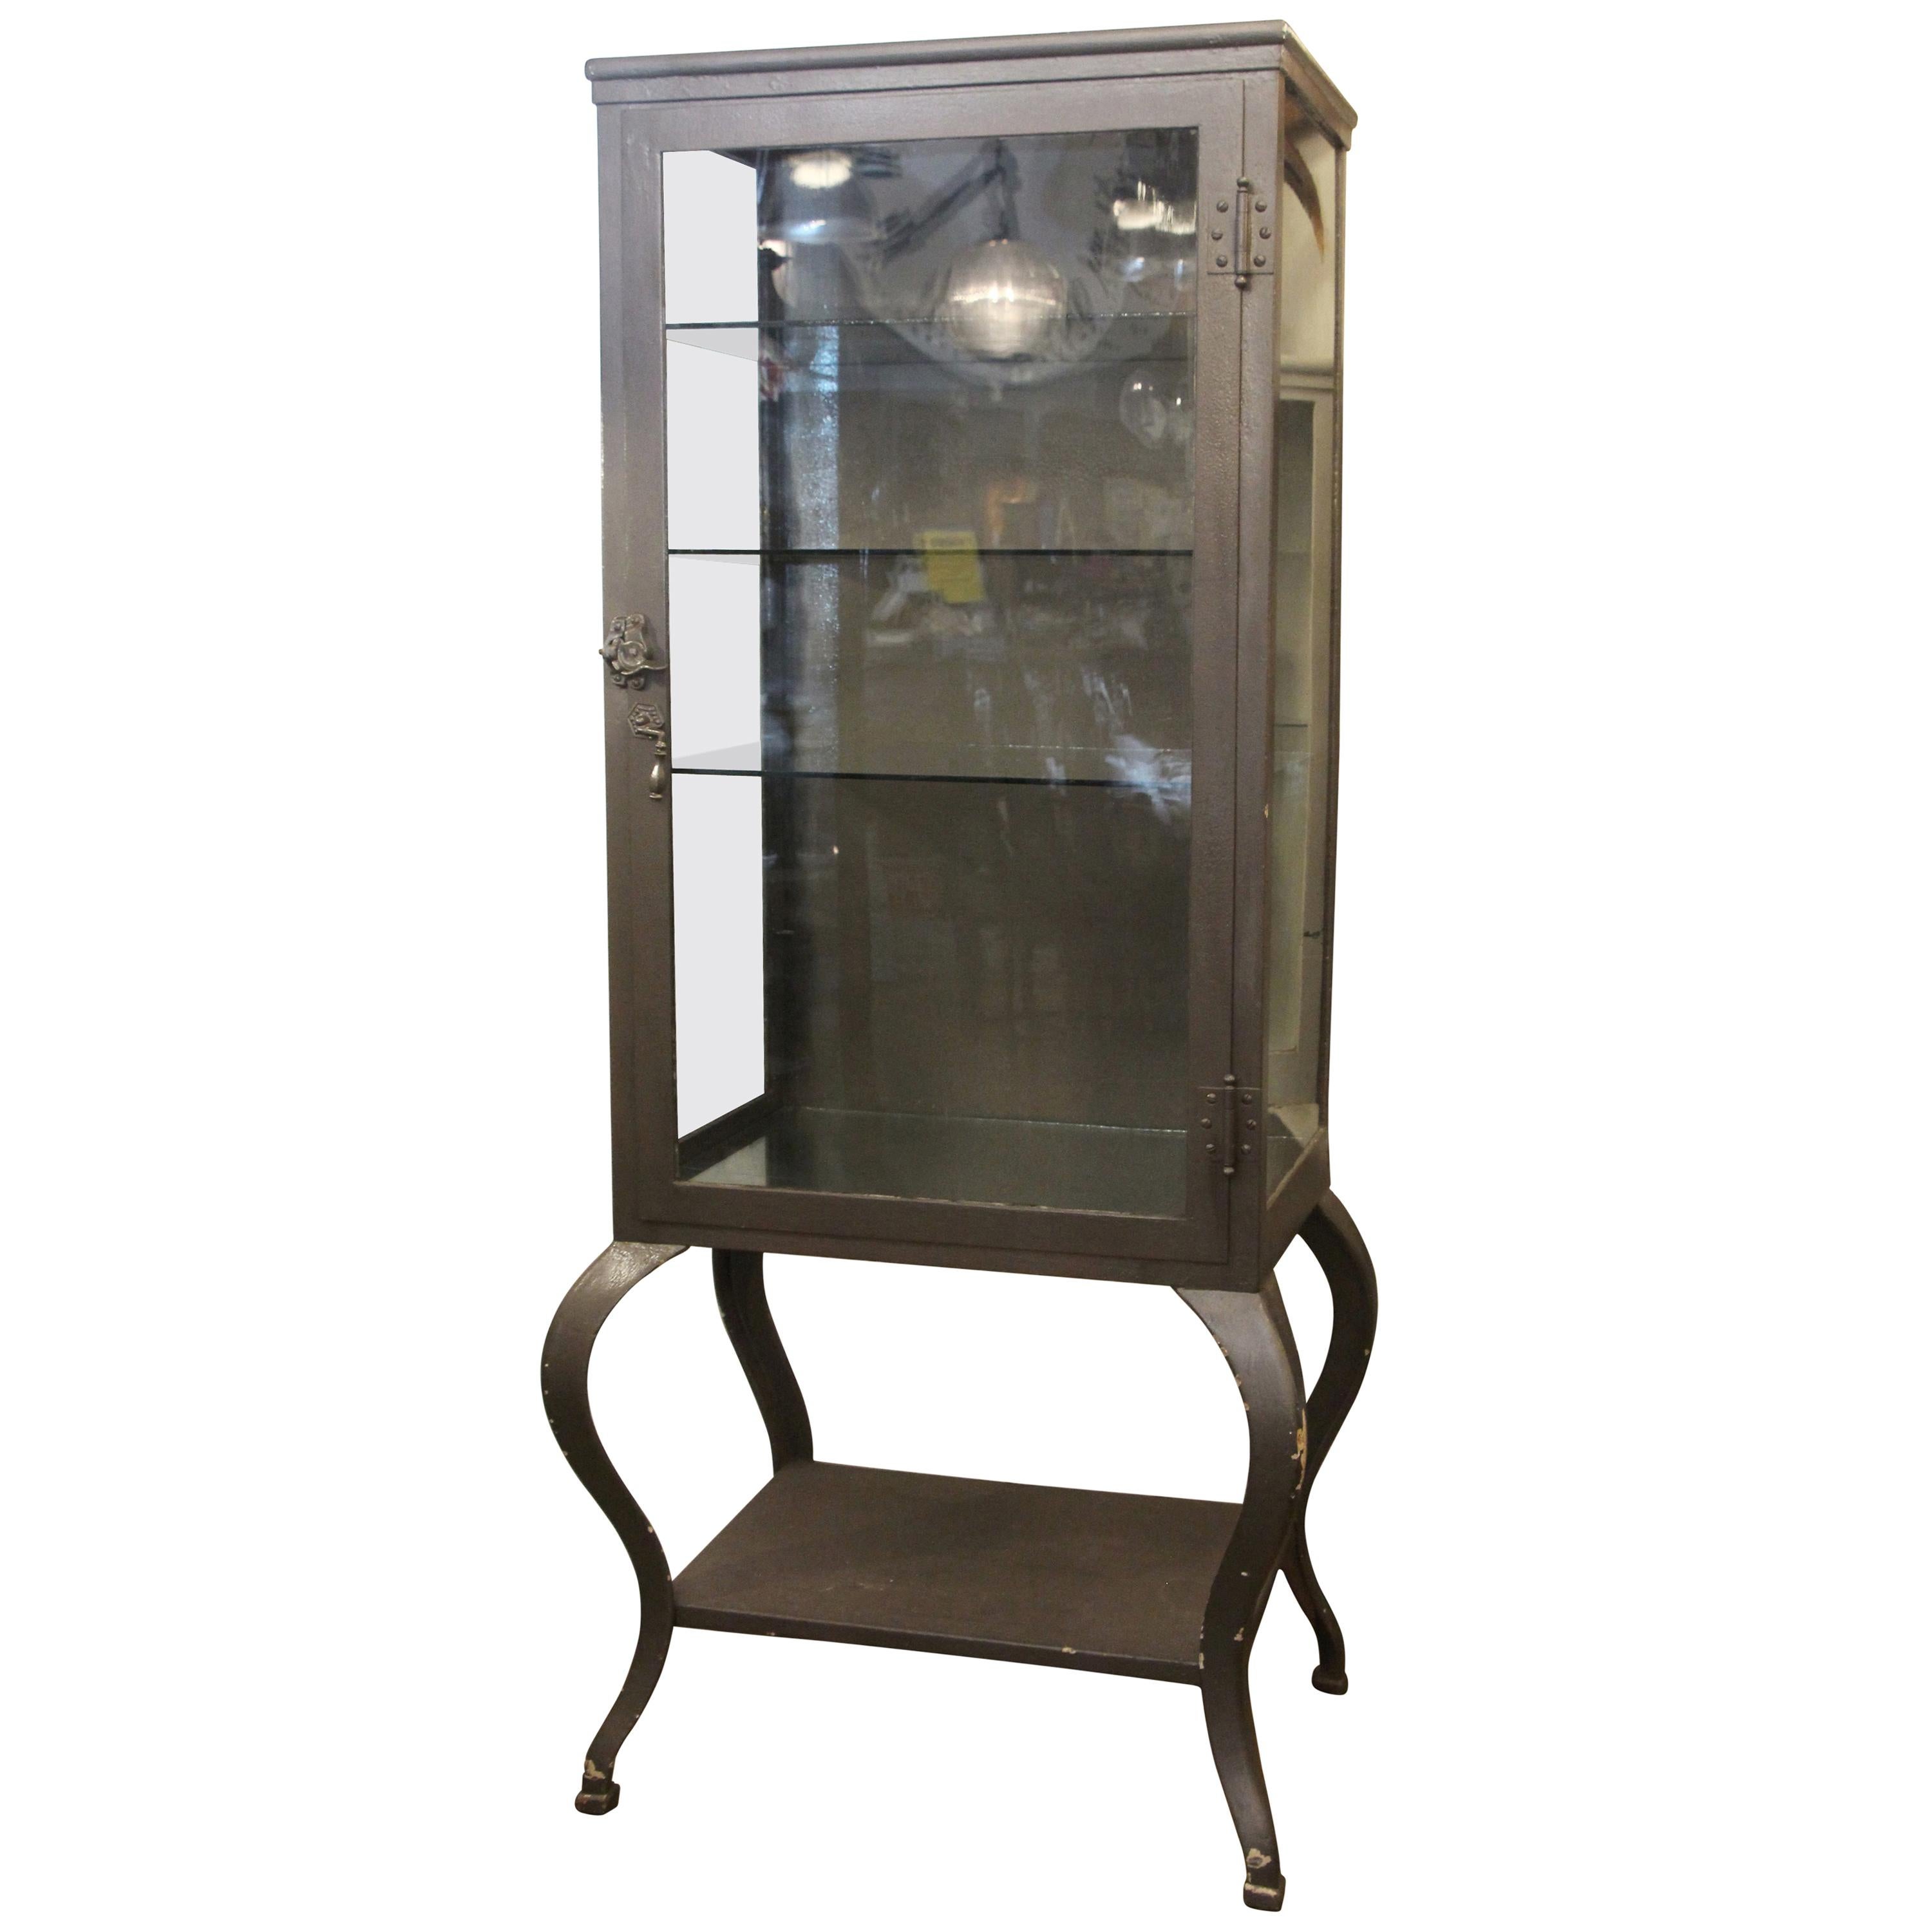 1920s Painted Steel Dental Cabinet with Cabriole Legs and Shelves